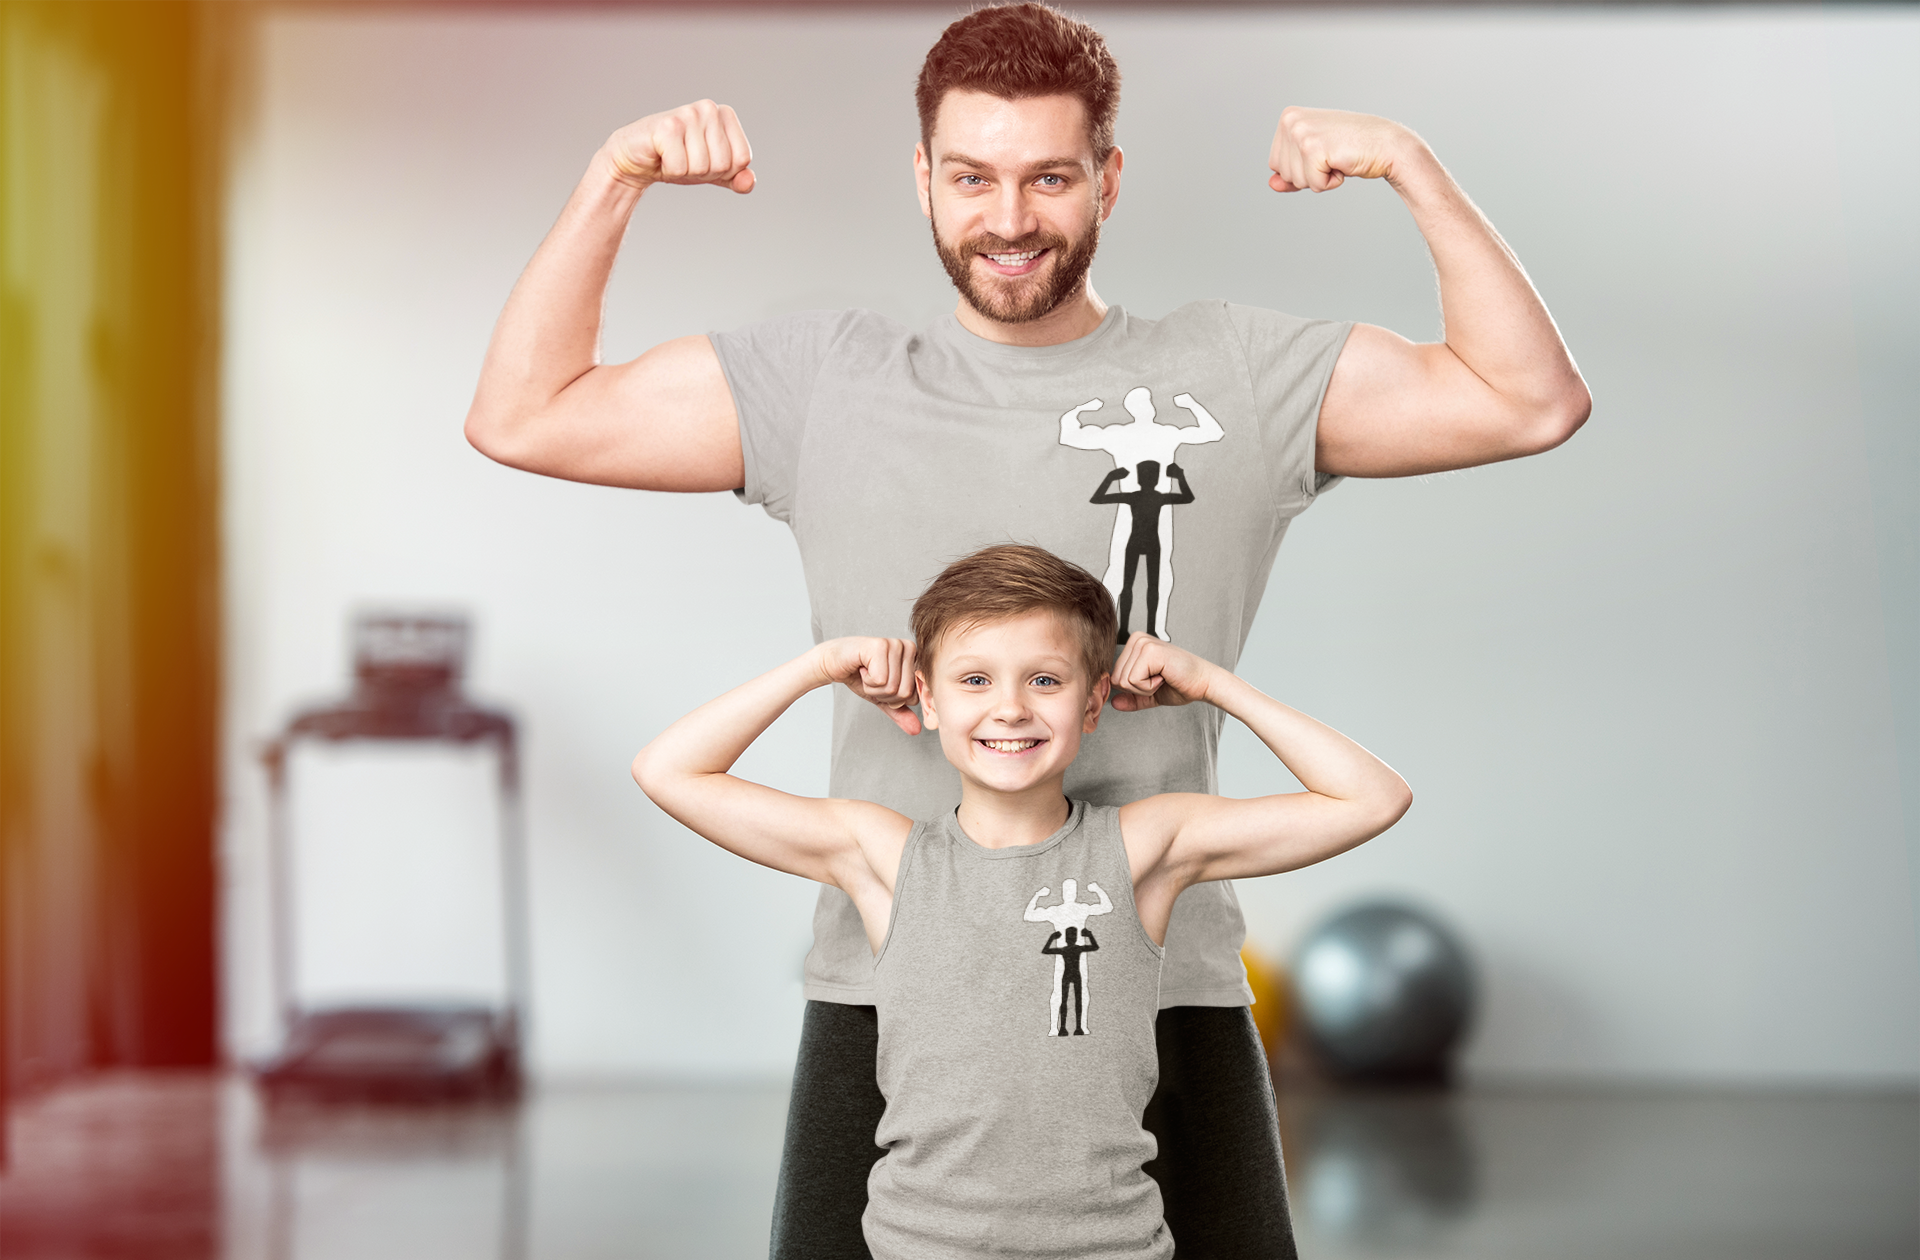 Adult man and kid in workout room flexing their arms